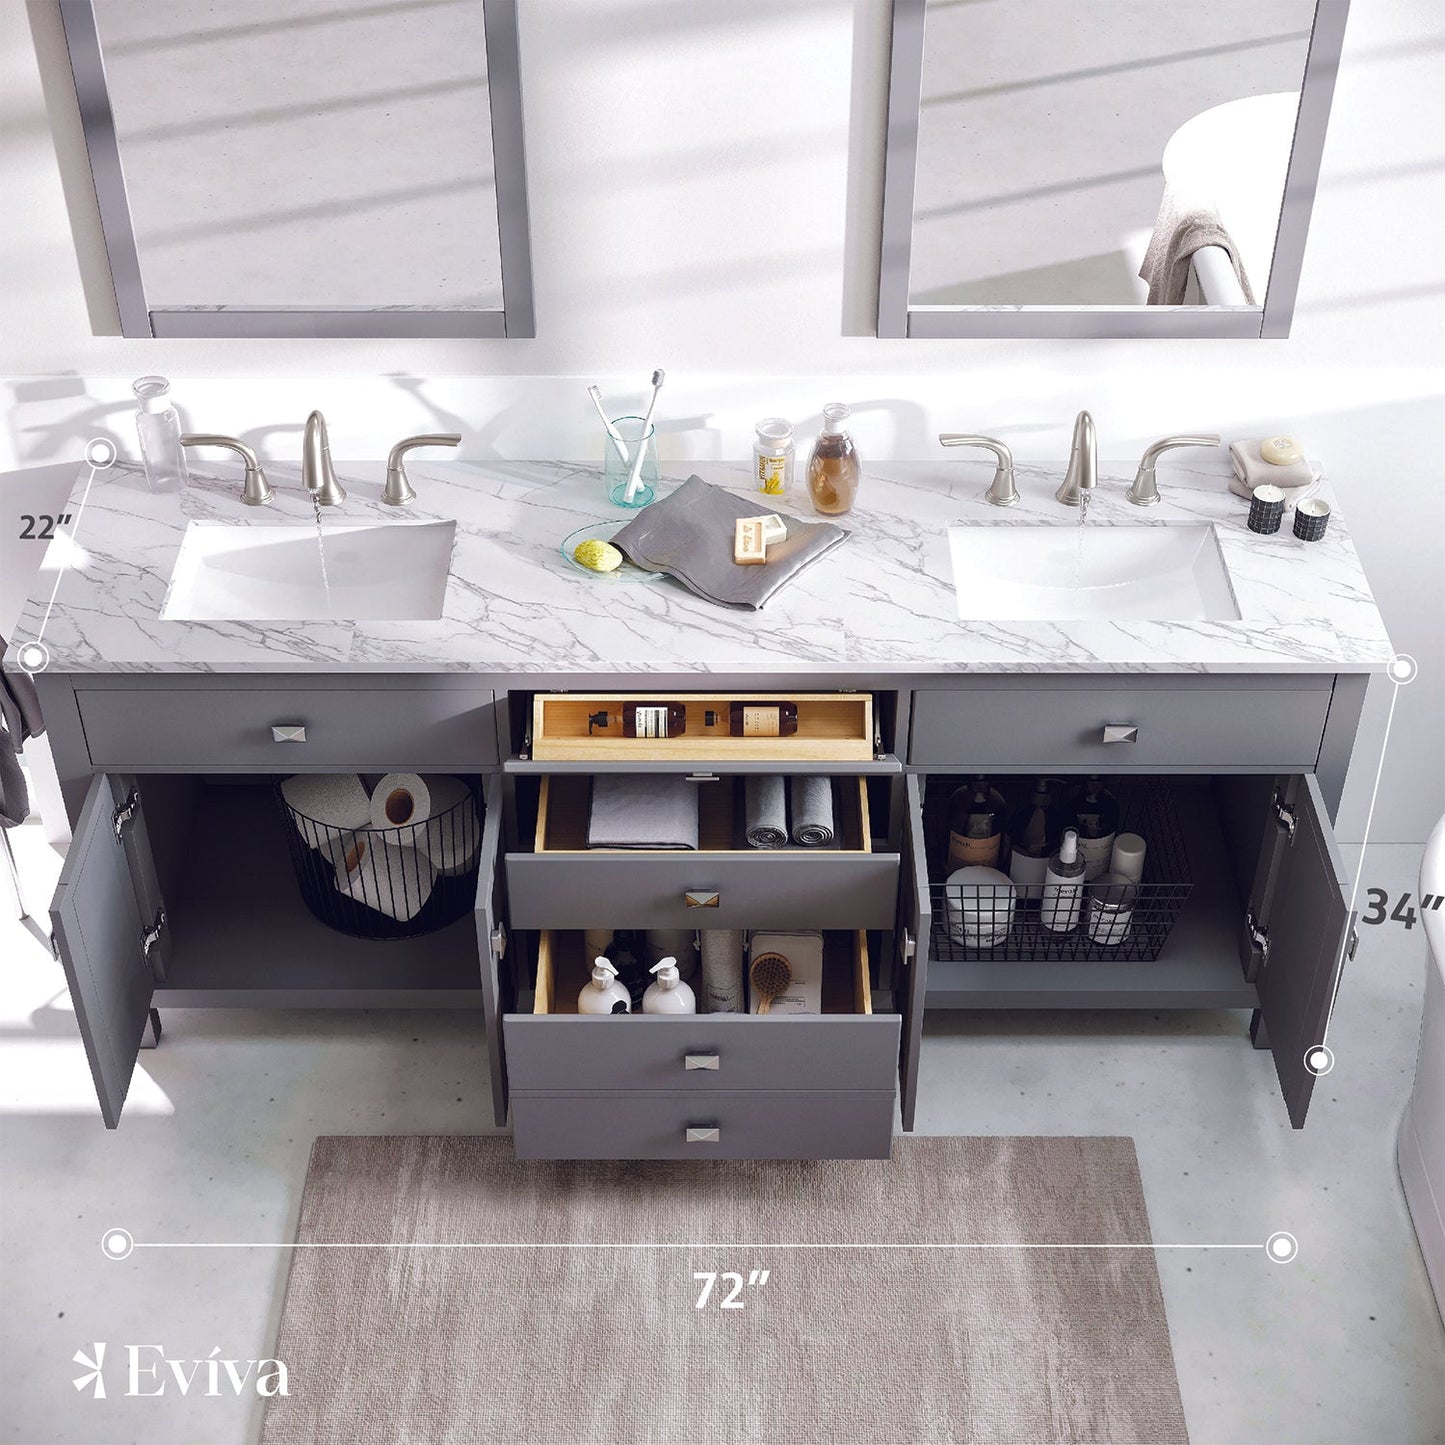 Totti Artemis 72 Inch Gray Transitional Double Sink Bathroom Vanity with White Carrara Style Man-Made Stone Countertop and Under-mount Porcelain Sinks